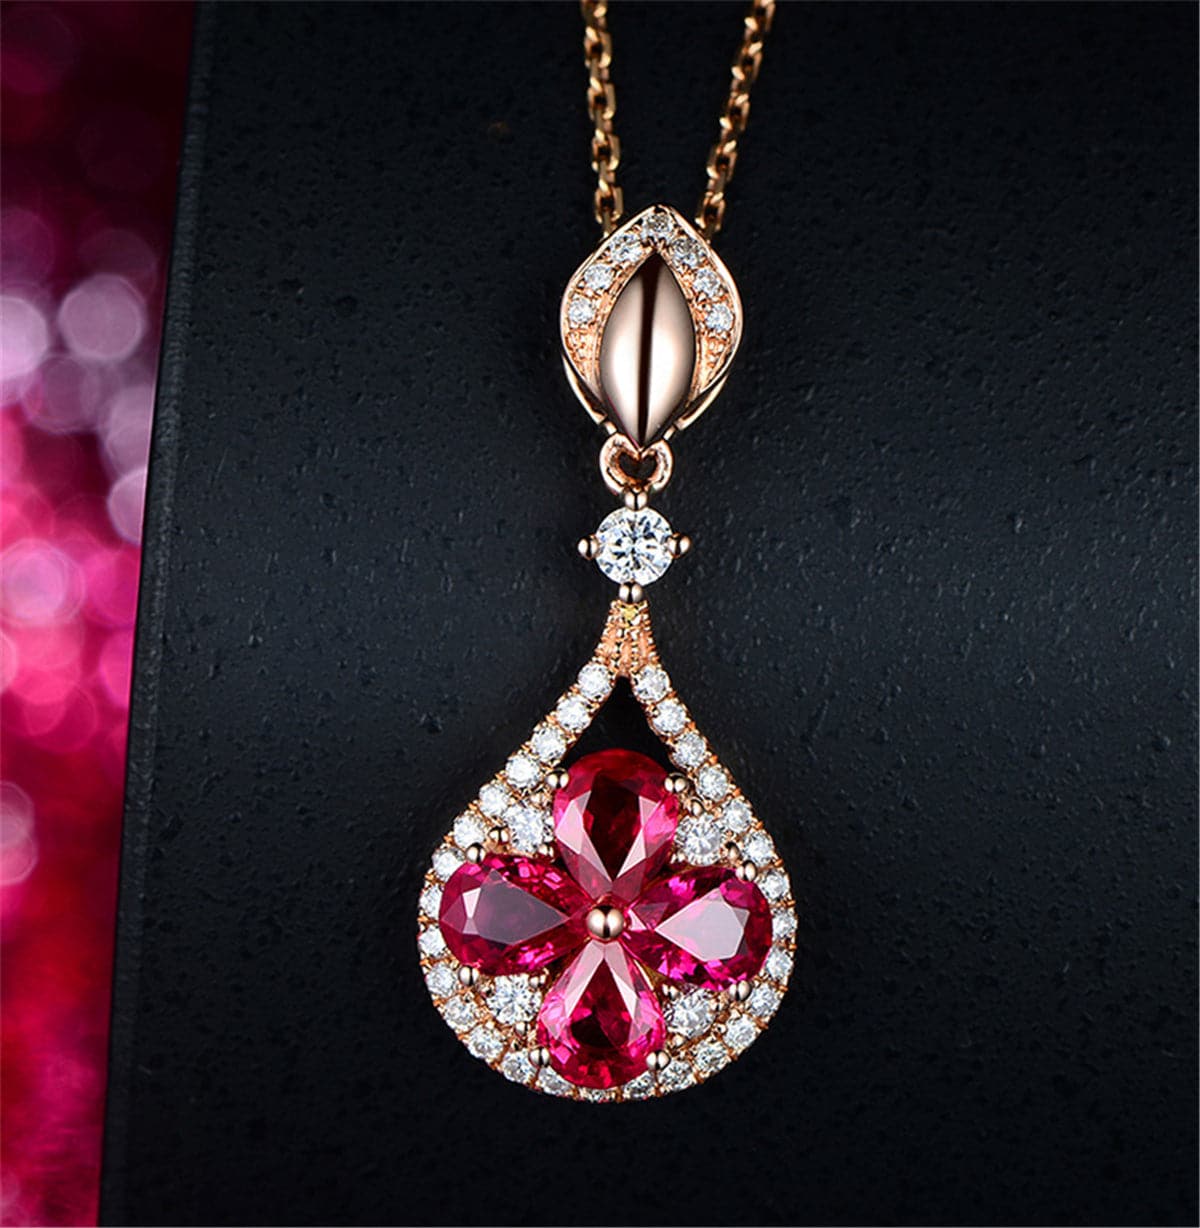 Red Pear Crystal & 18K Rose Gold-Plated Teardrop Pendant Necklace